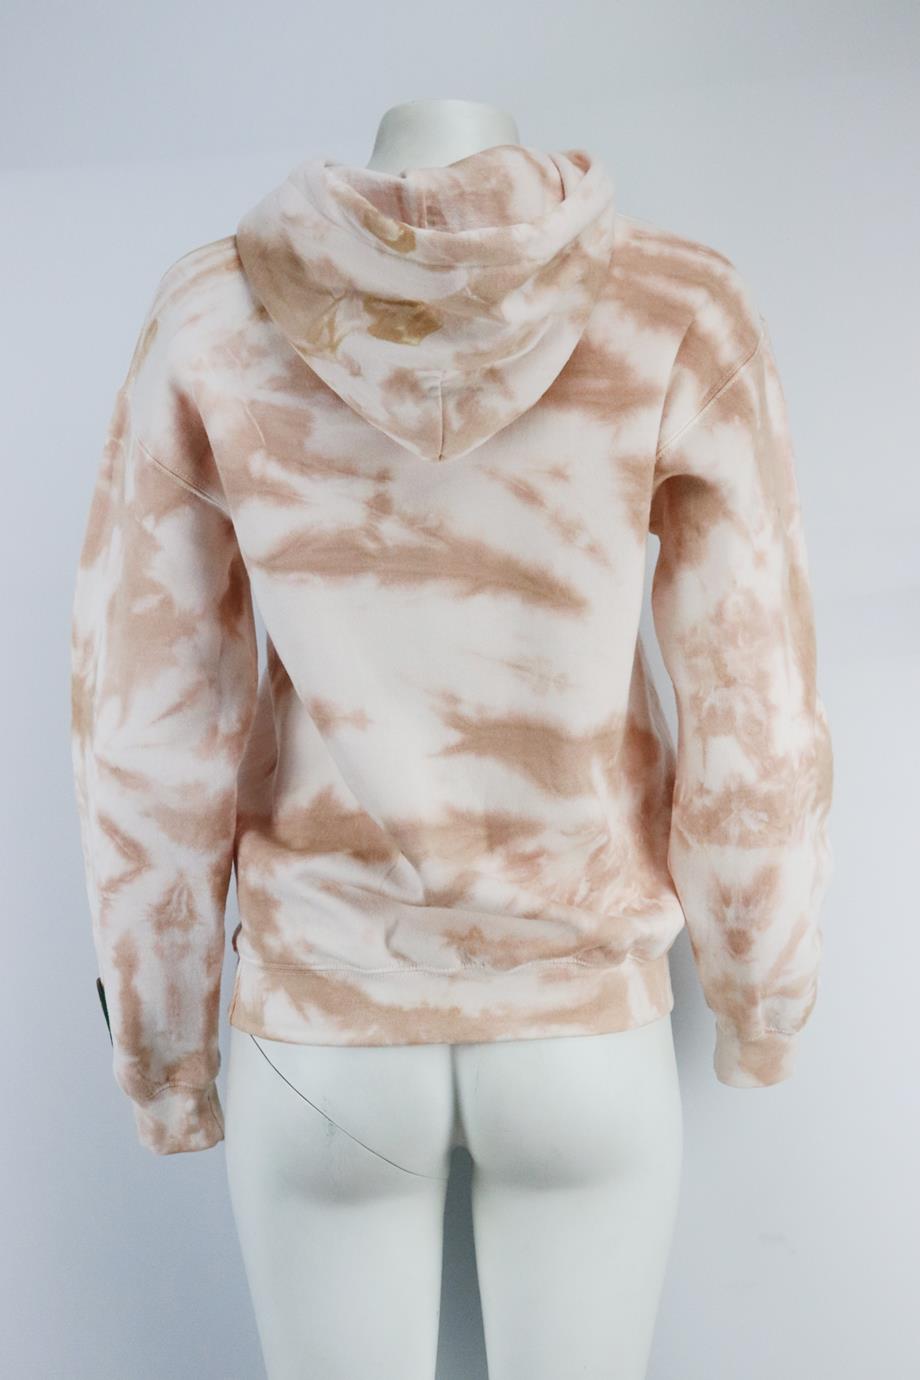 DANZY TIE DYED COTTON JERSEY HOODIE SMALL